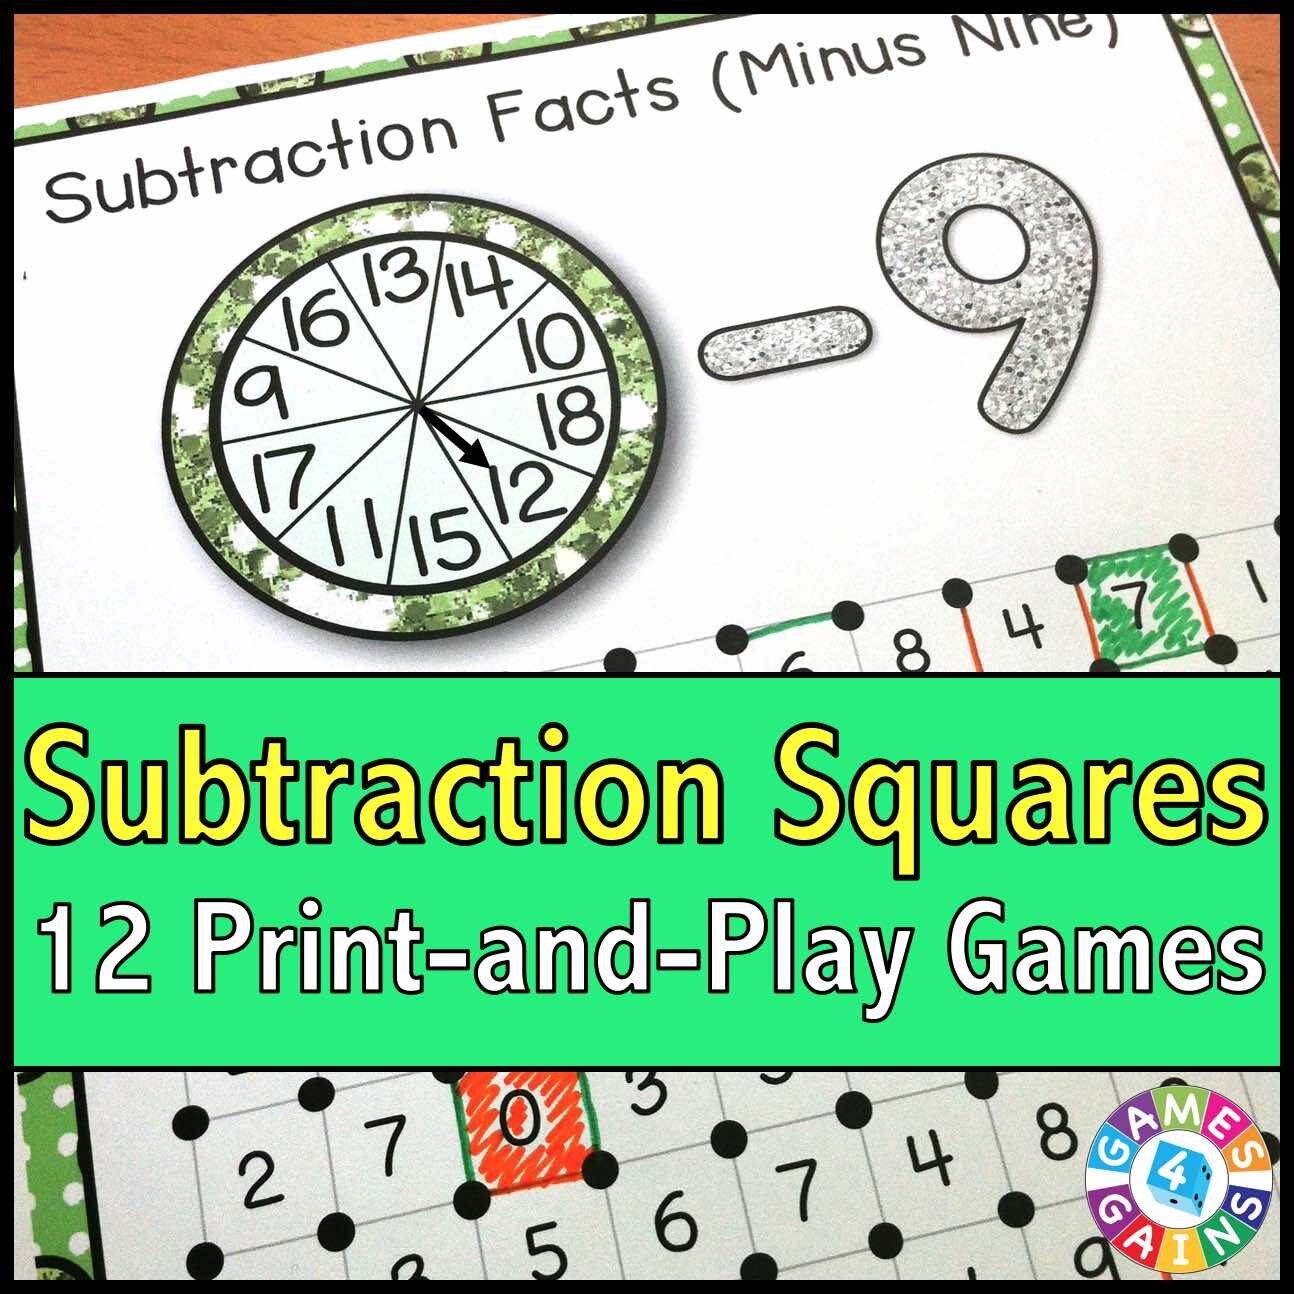 Subtraction Game Cover.jpg